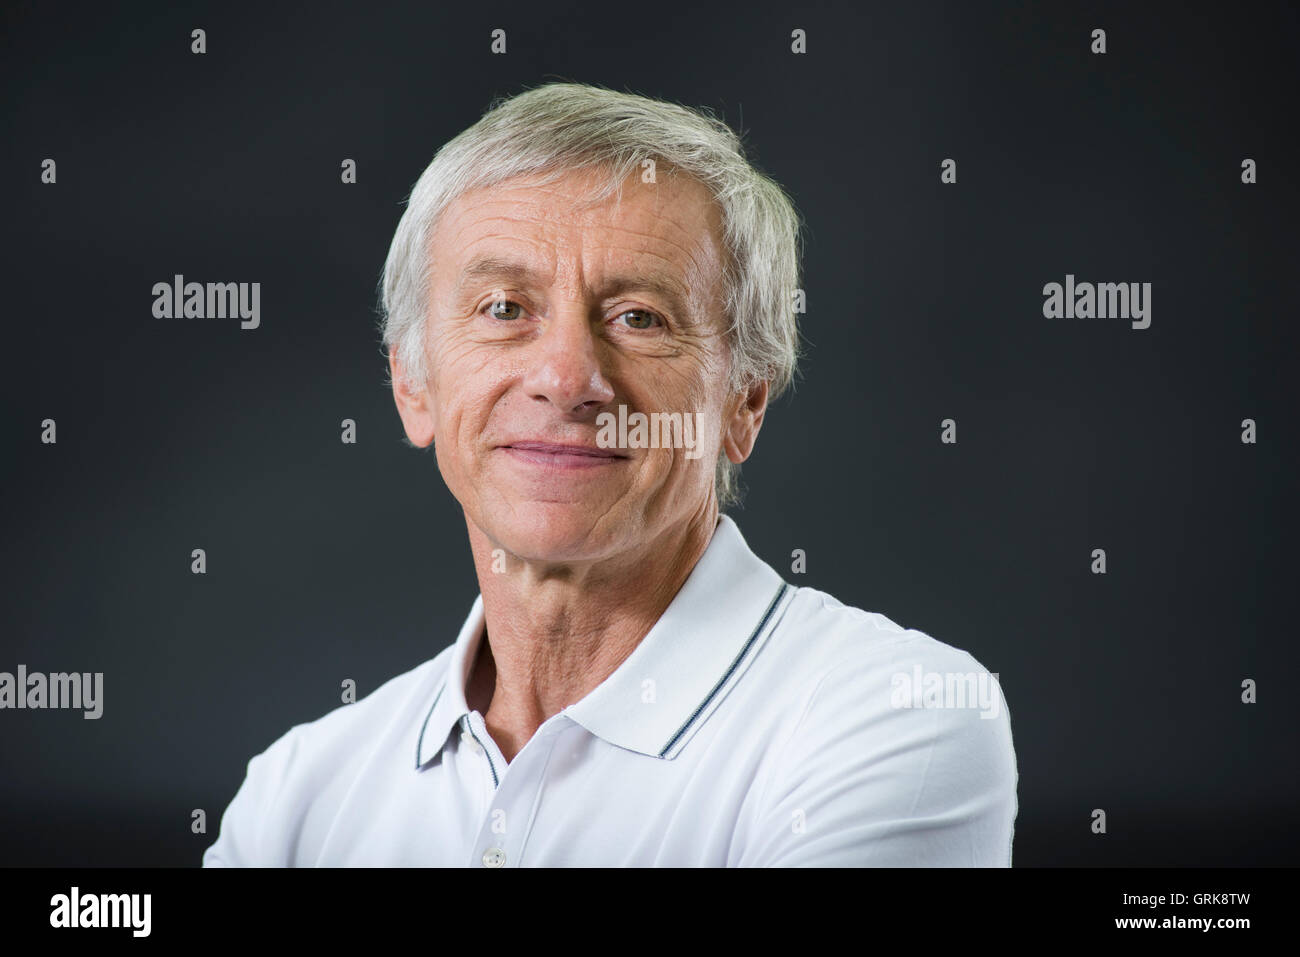 French doctor, diplomat, historian, globetrotter and novelist Jean-Christophe Rufin. Stock Photo